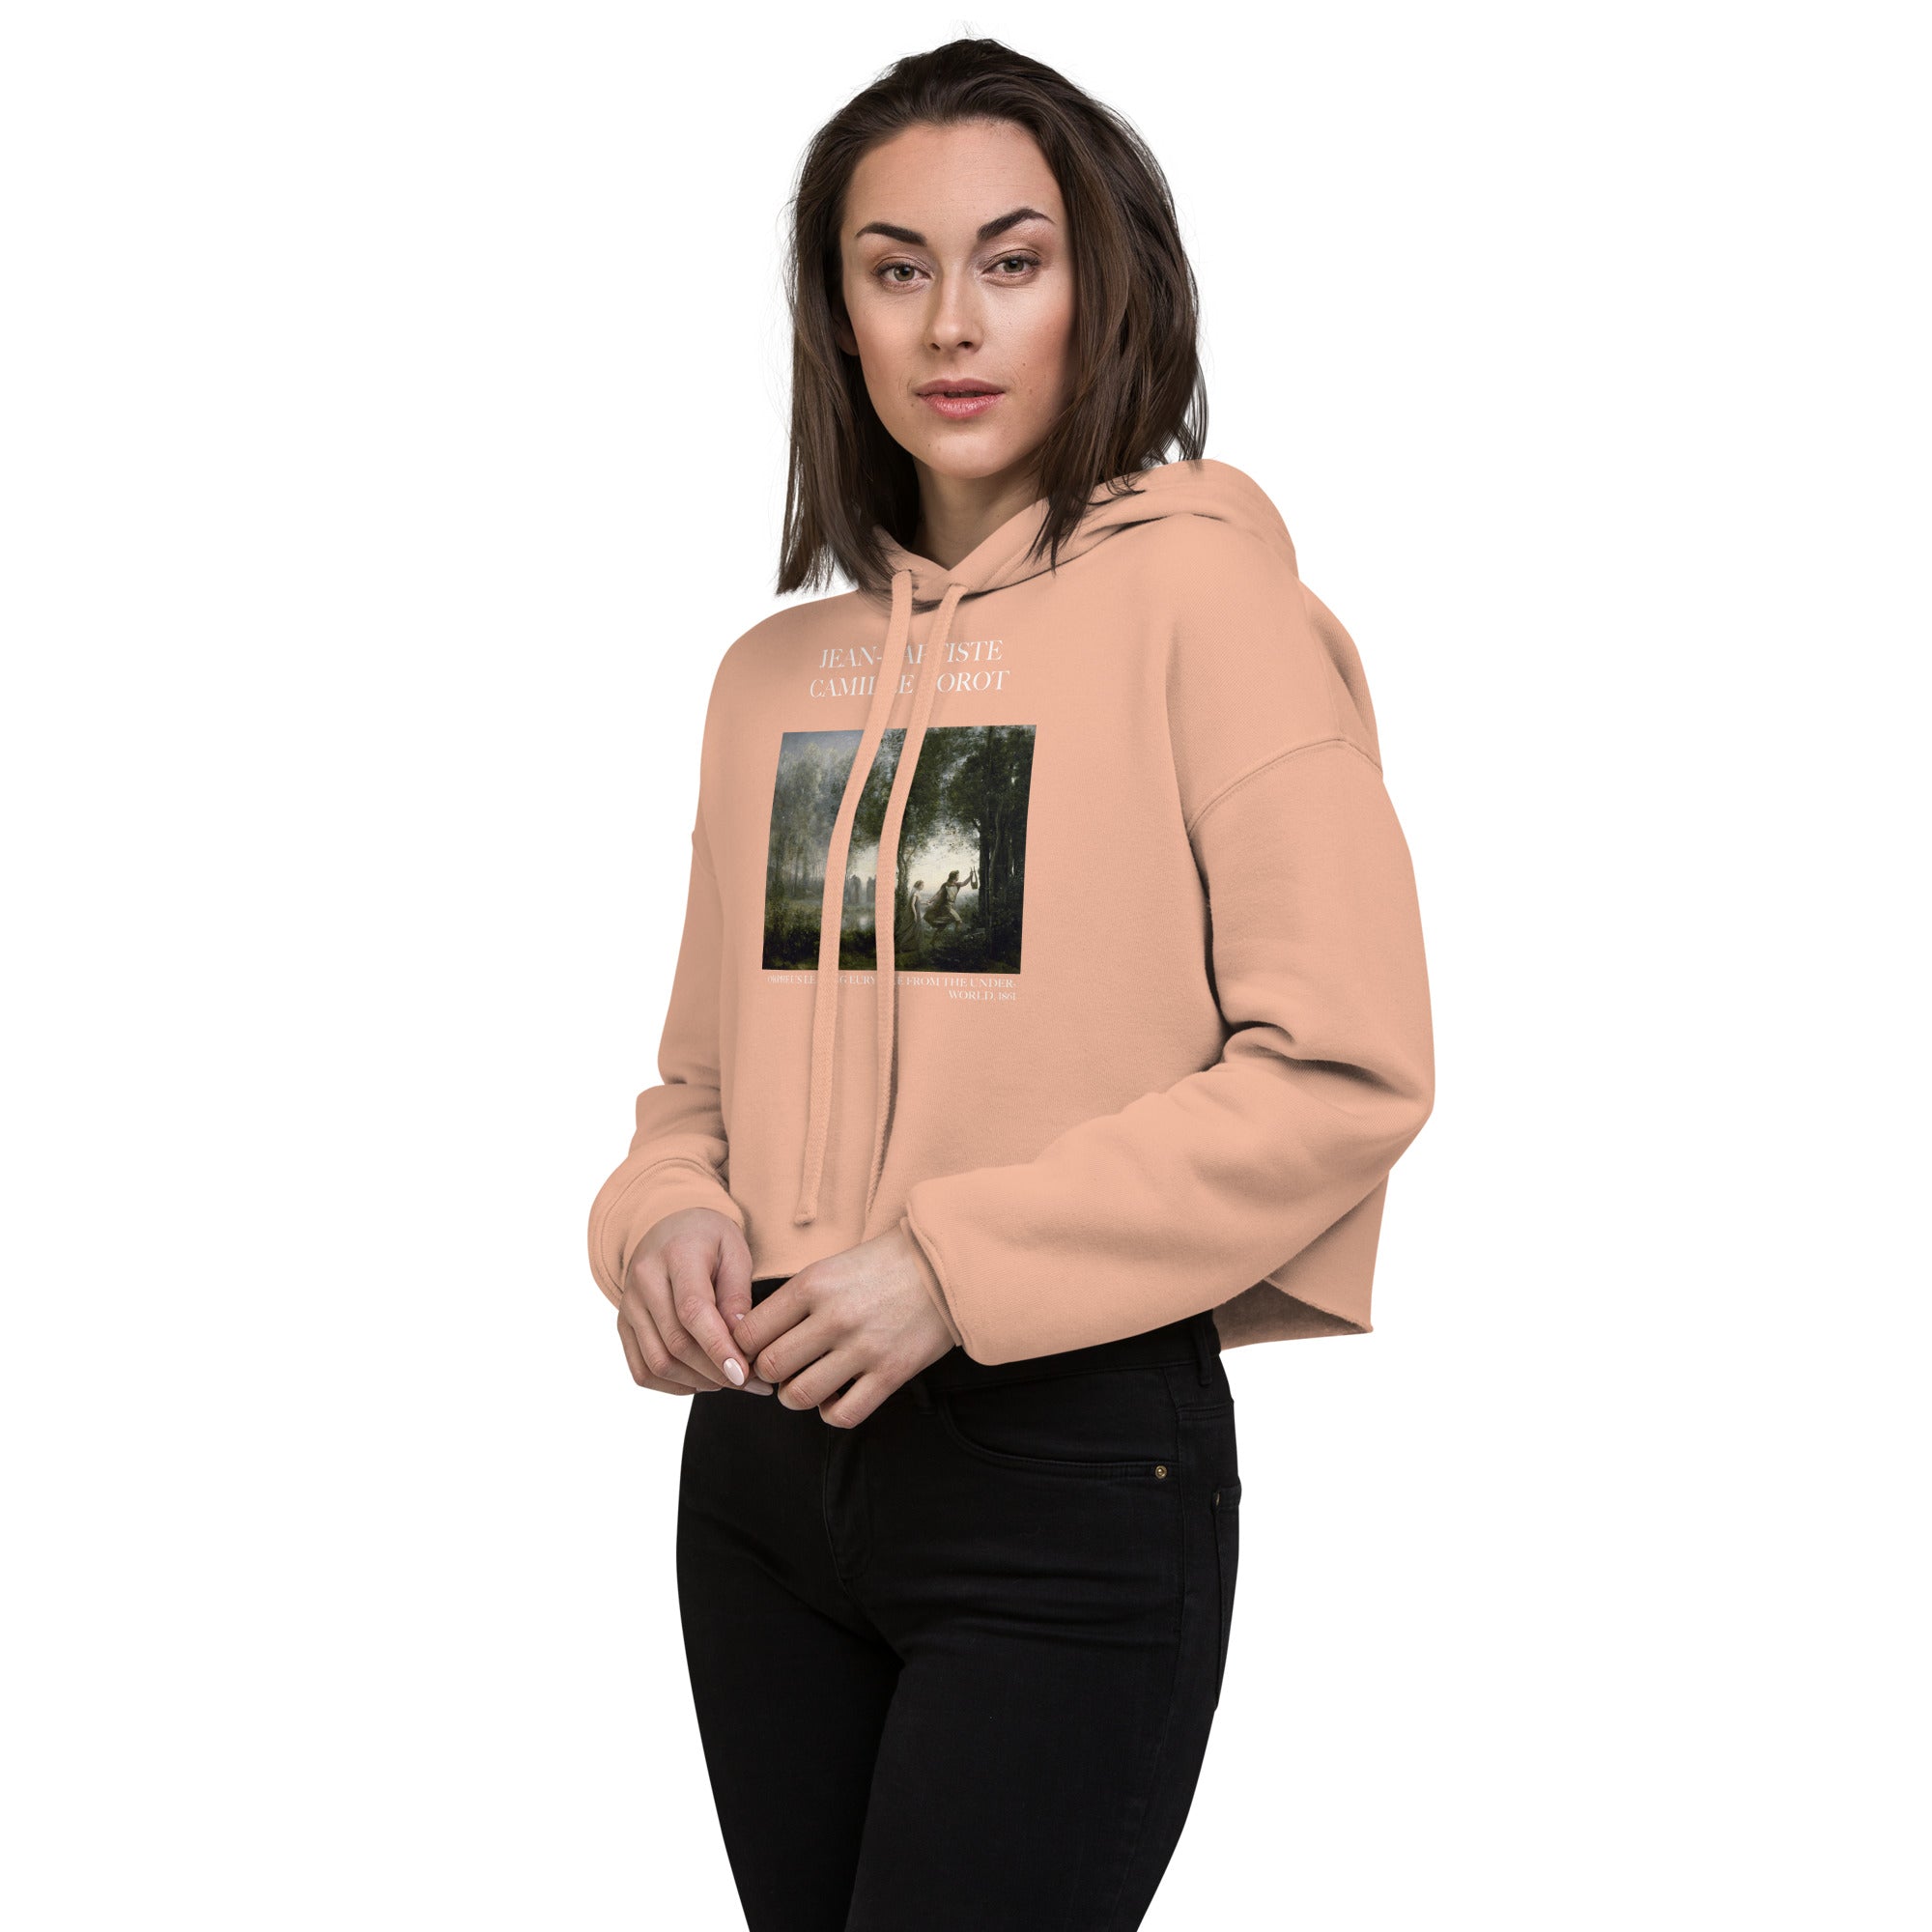 Jean-Baptiste Camille Corot 'Orpheus Leading Eurydice from the Underworld' Famous Painting Cropped Hoodie | Premium Art Cropped Hoodie